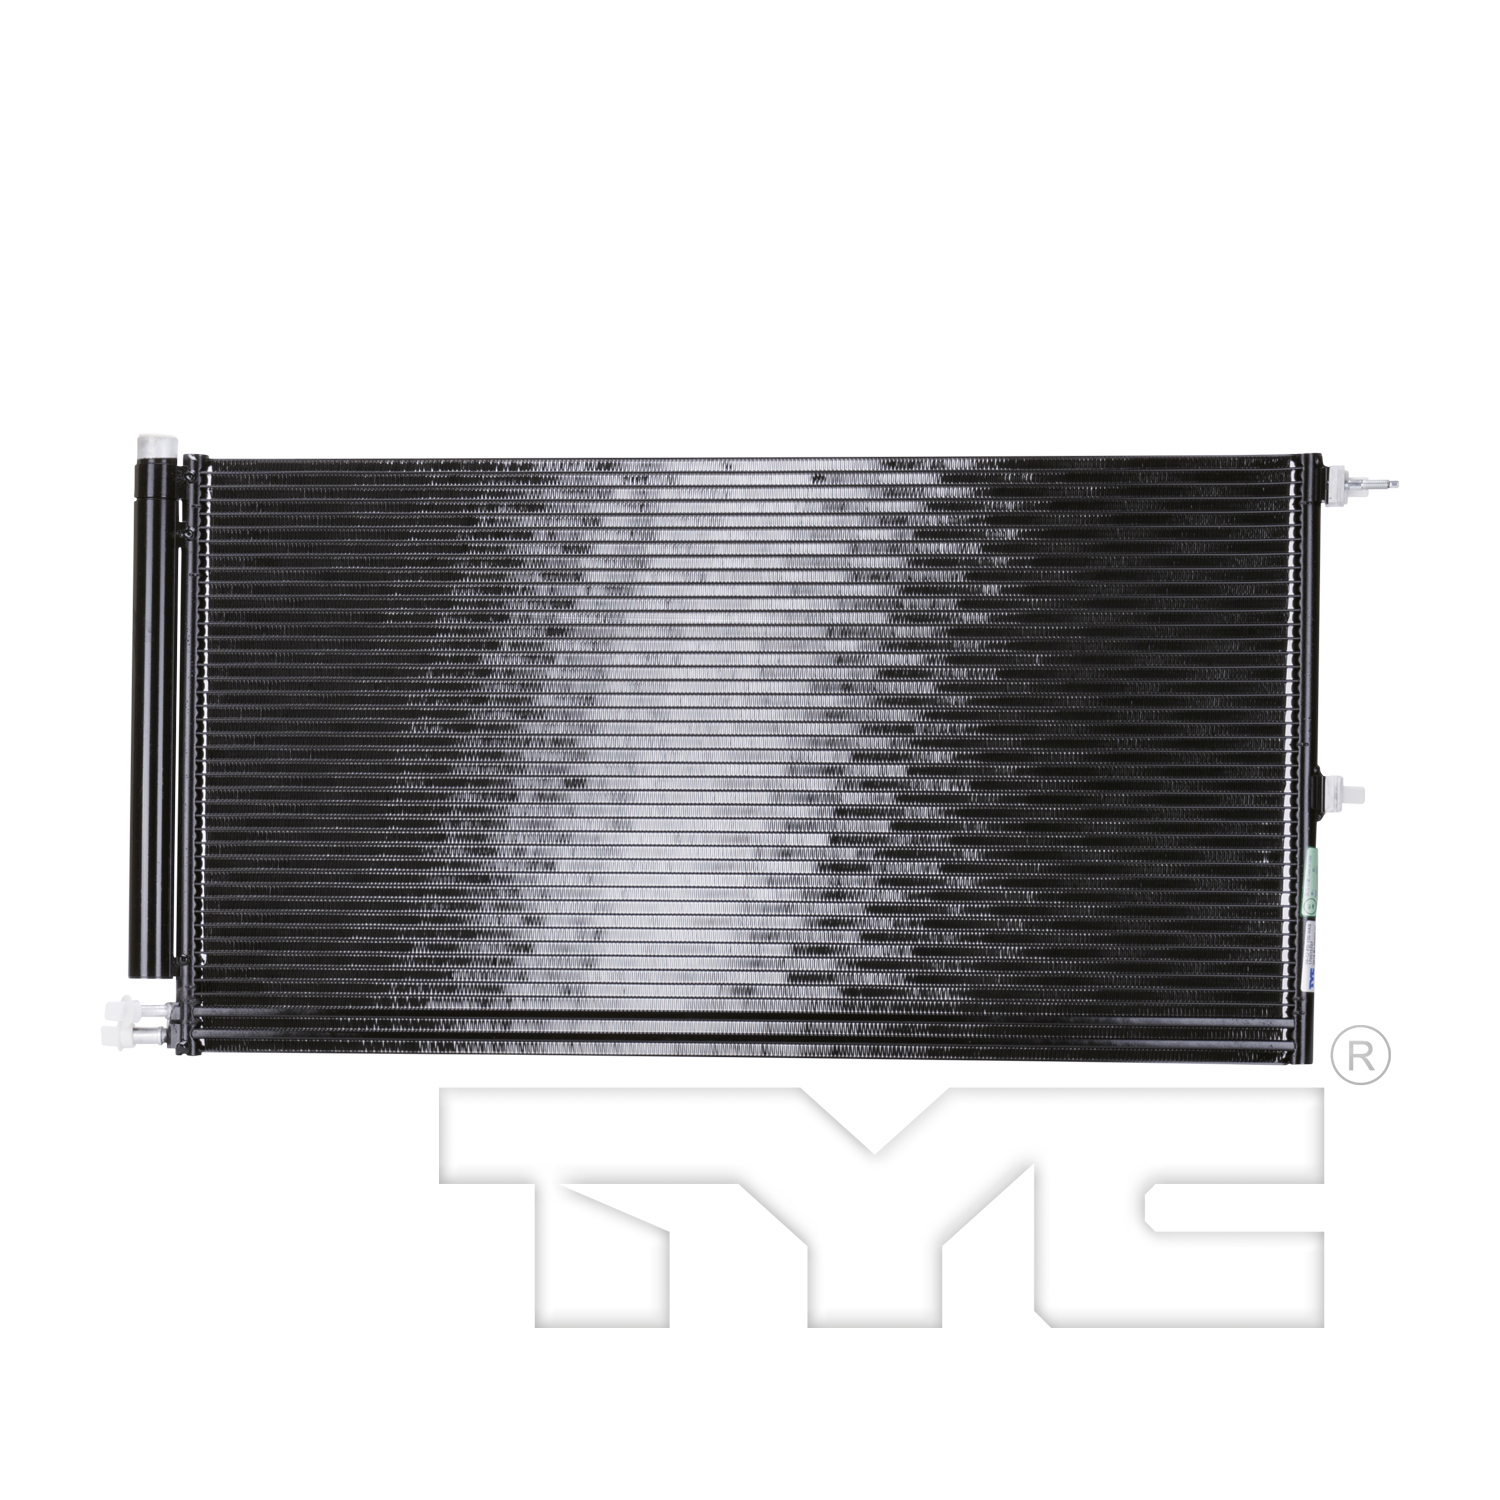 Aftermarket AC CONDENSERS for LINCOLN - NAVIGATOR, NAVIGATOR,07-14,Air conditioning condenser